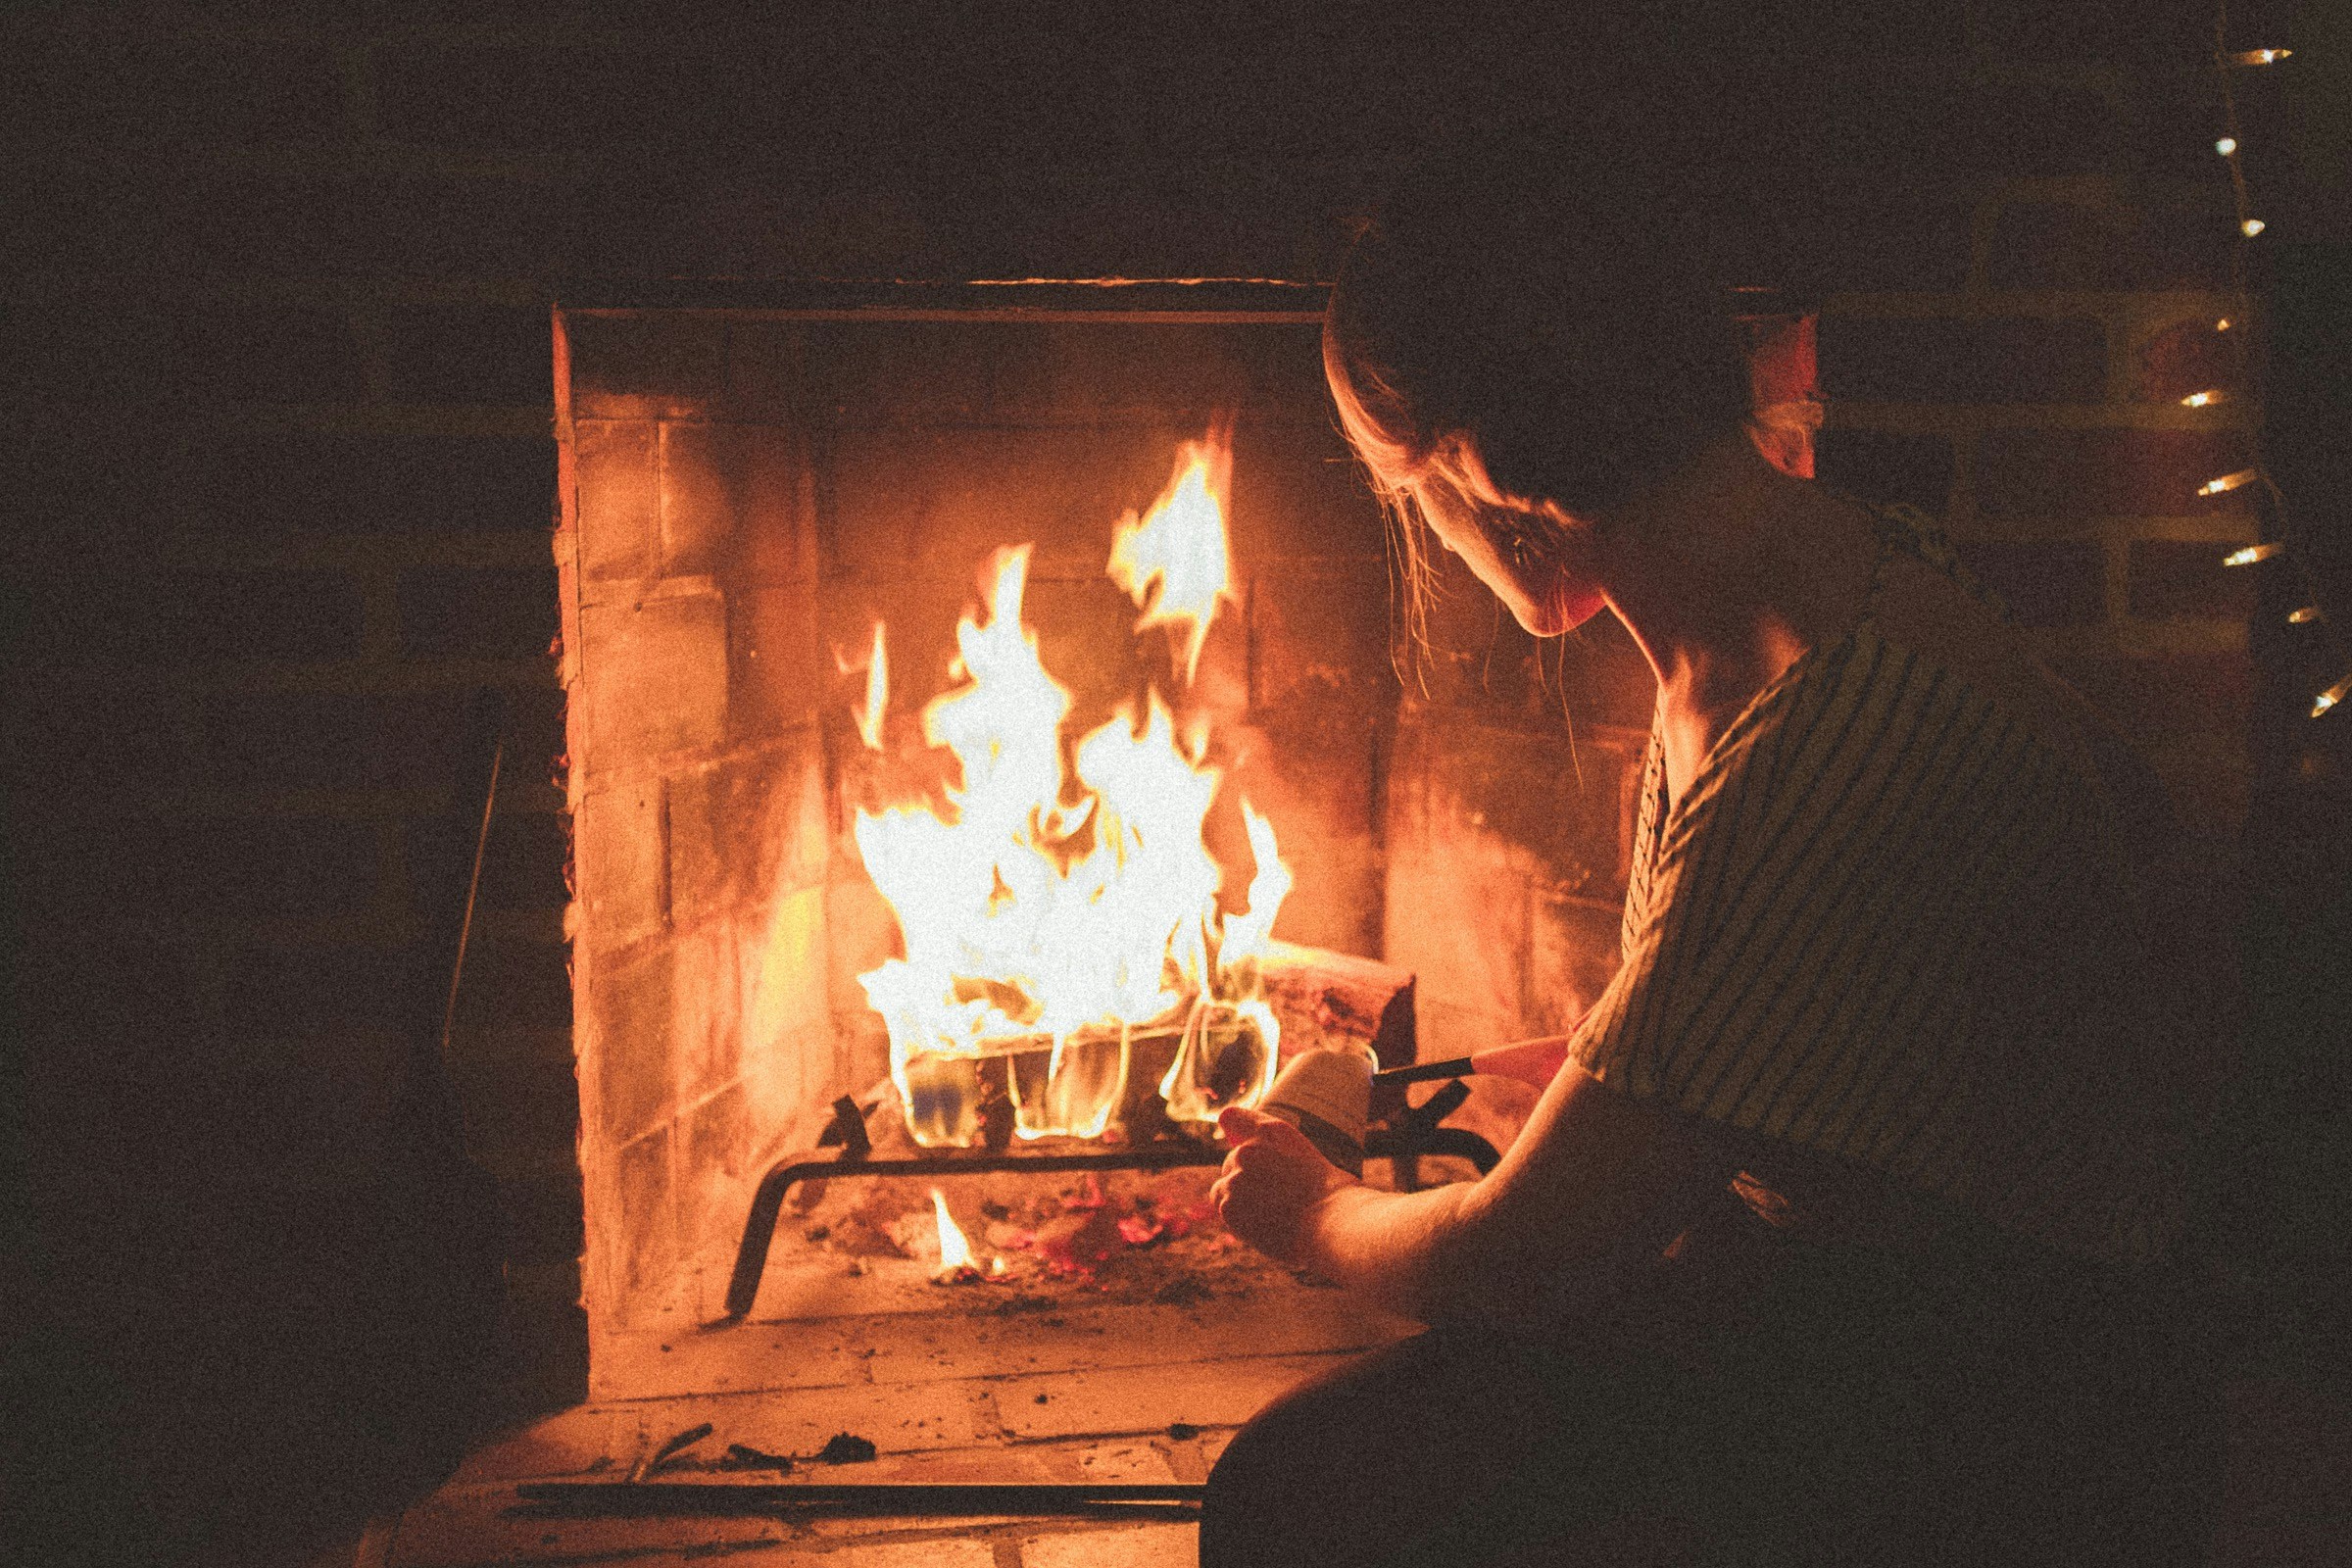 A person in front of a lit fireplace